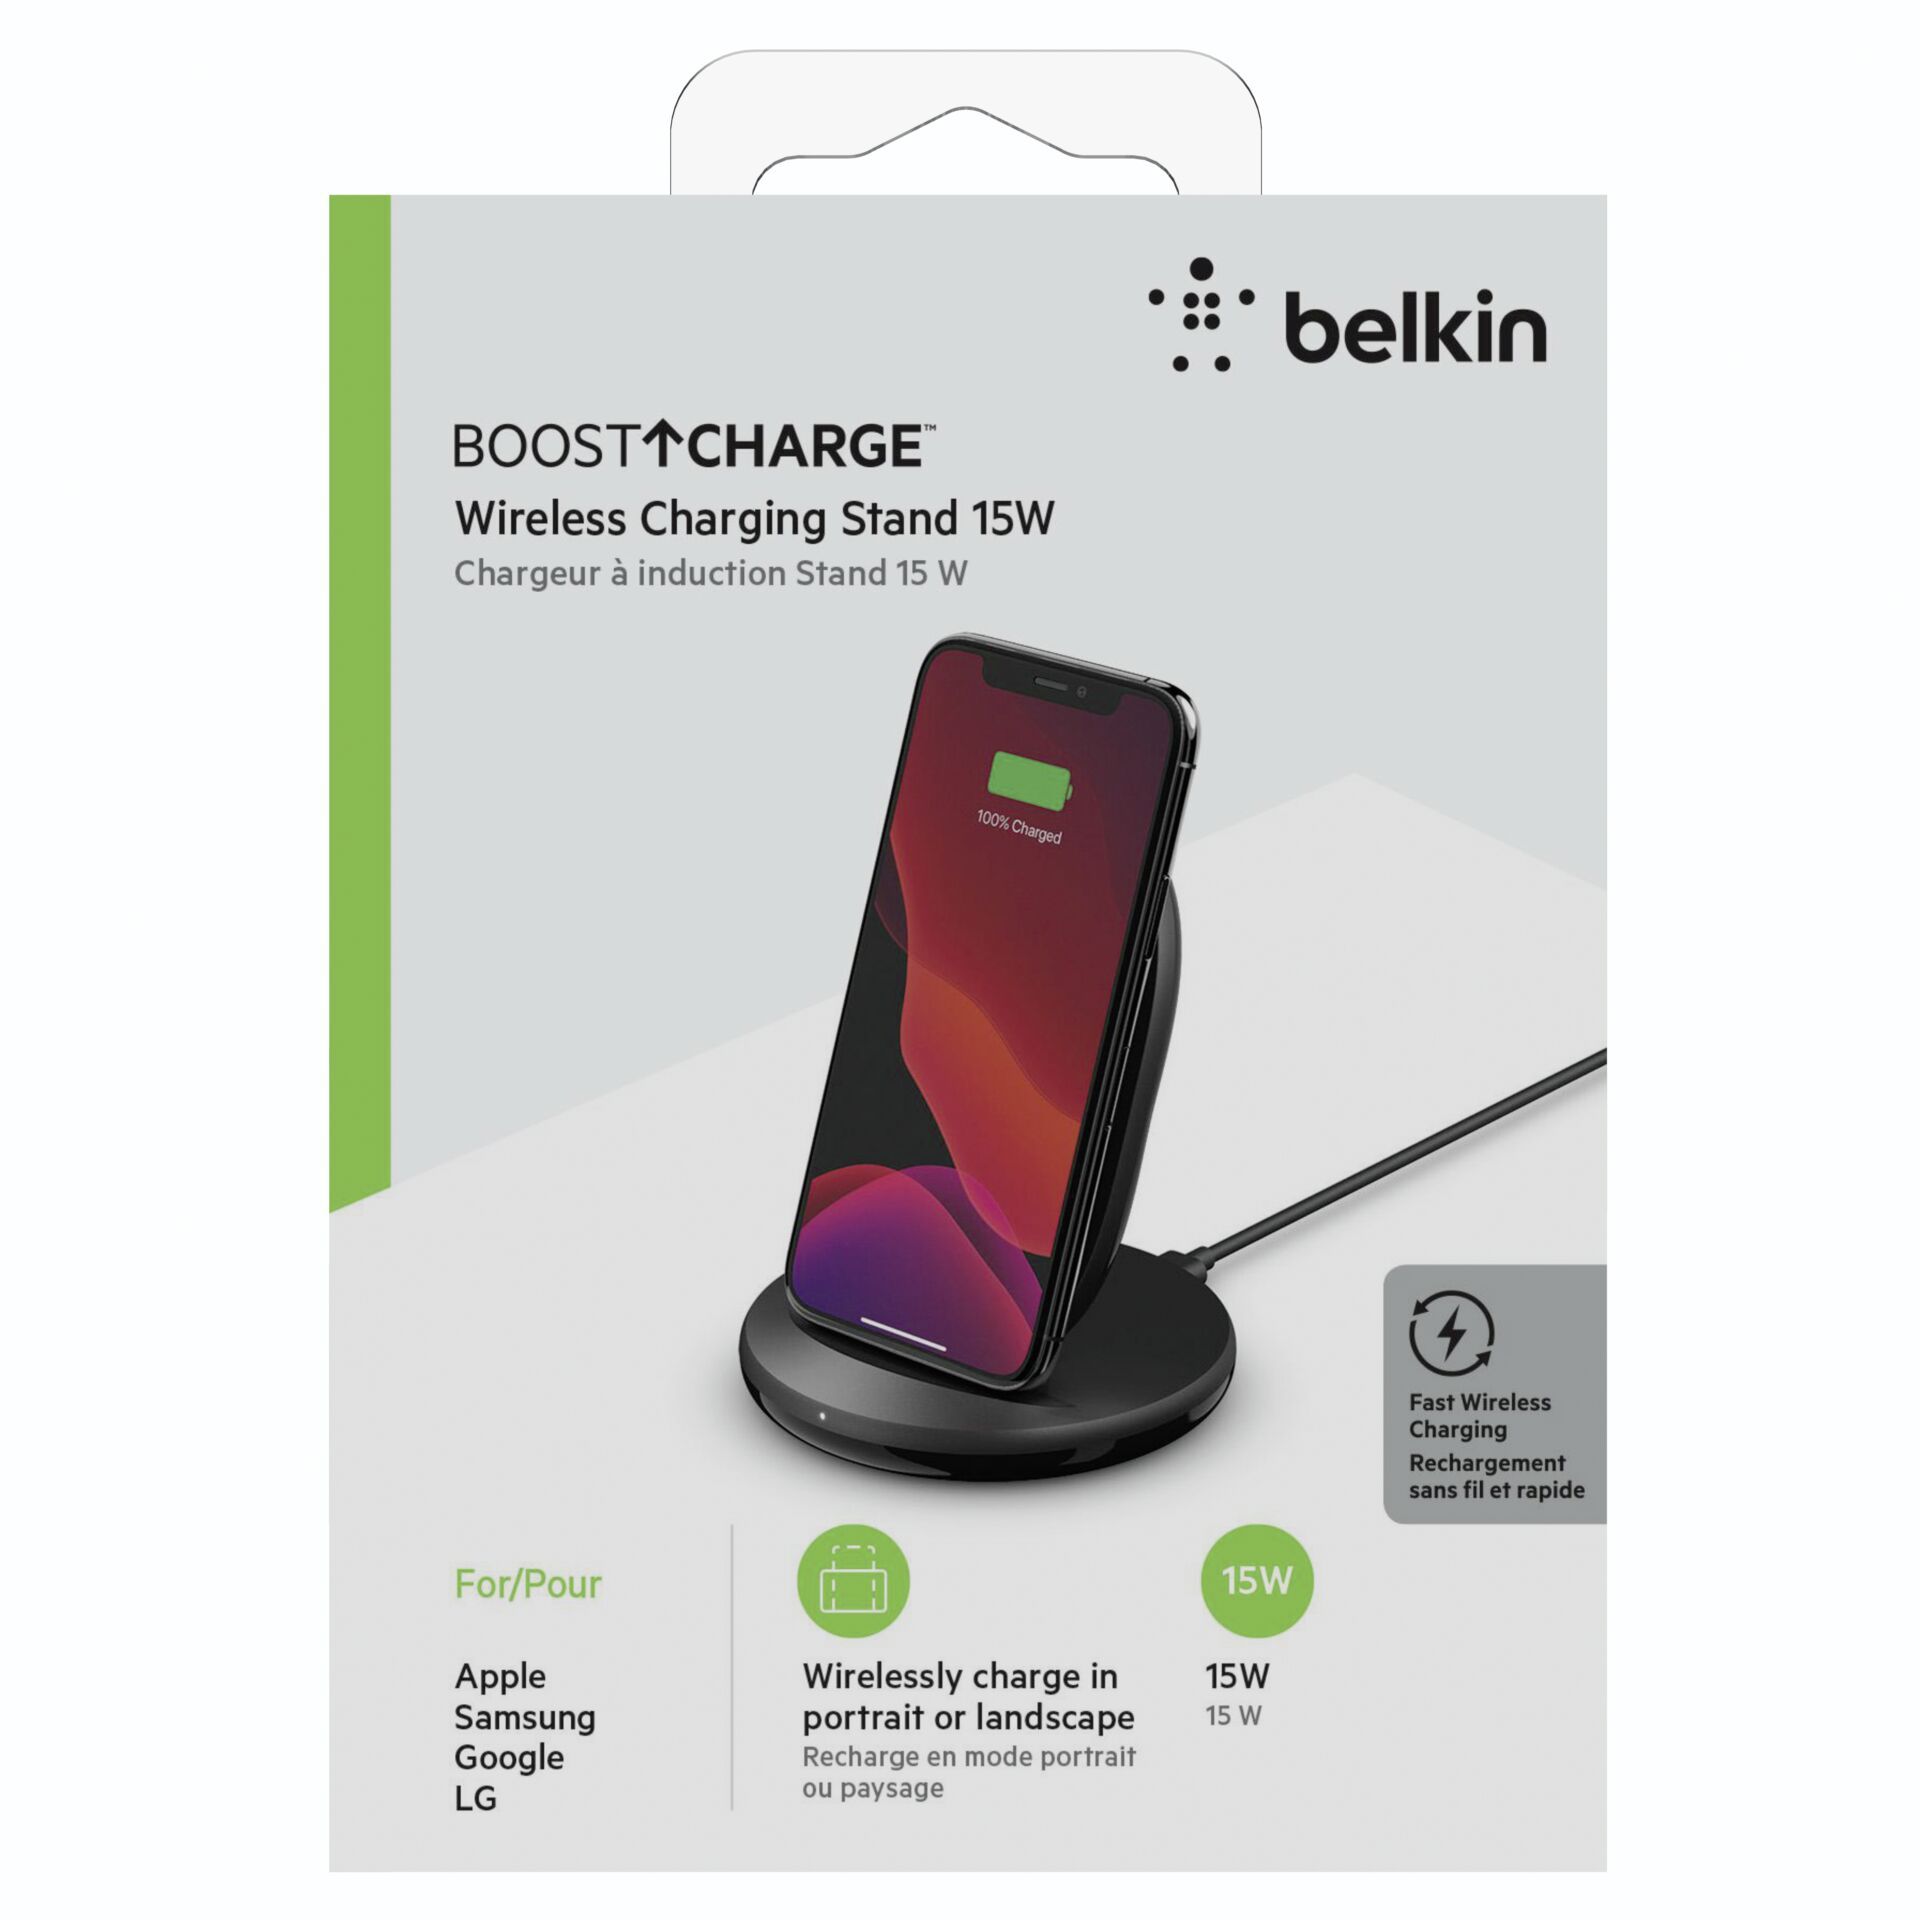 Belkin BOOST Charge Wireless Charging Stand 15W sw.WIB002vfB